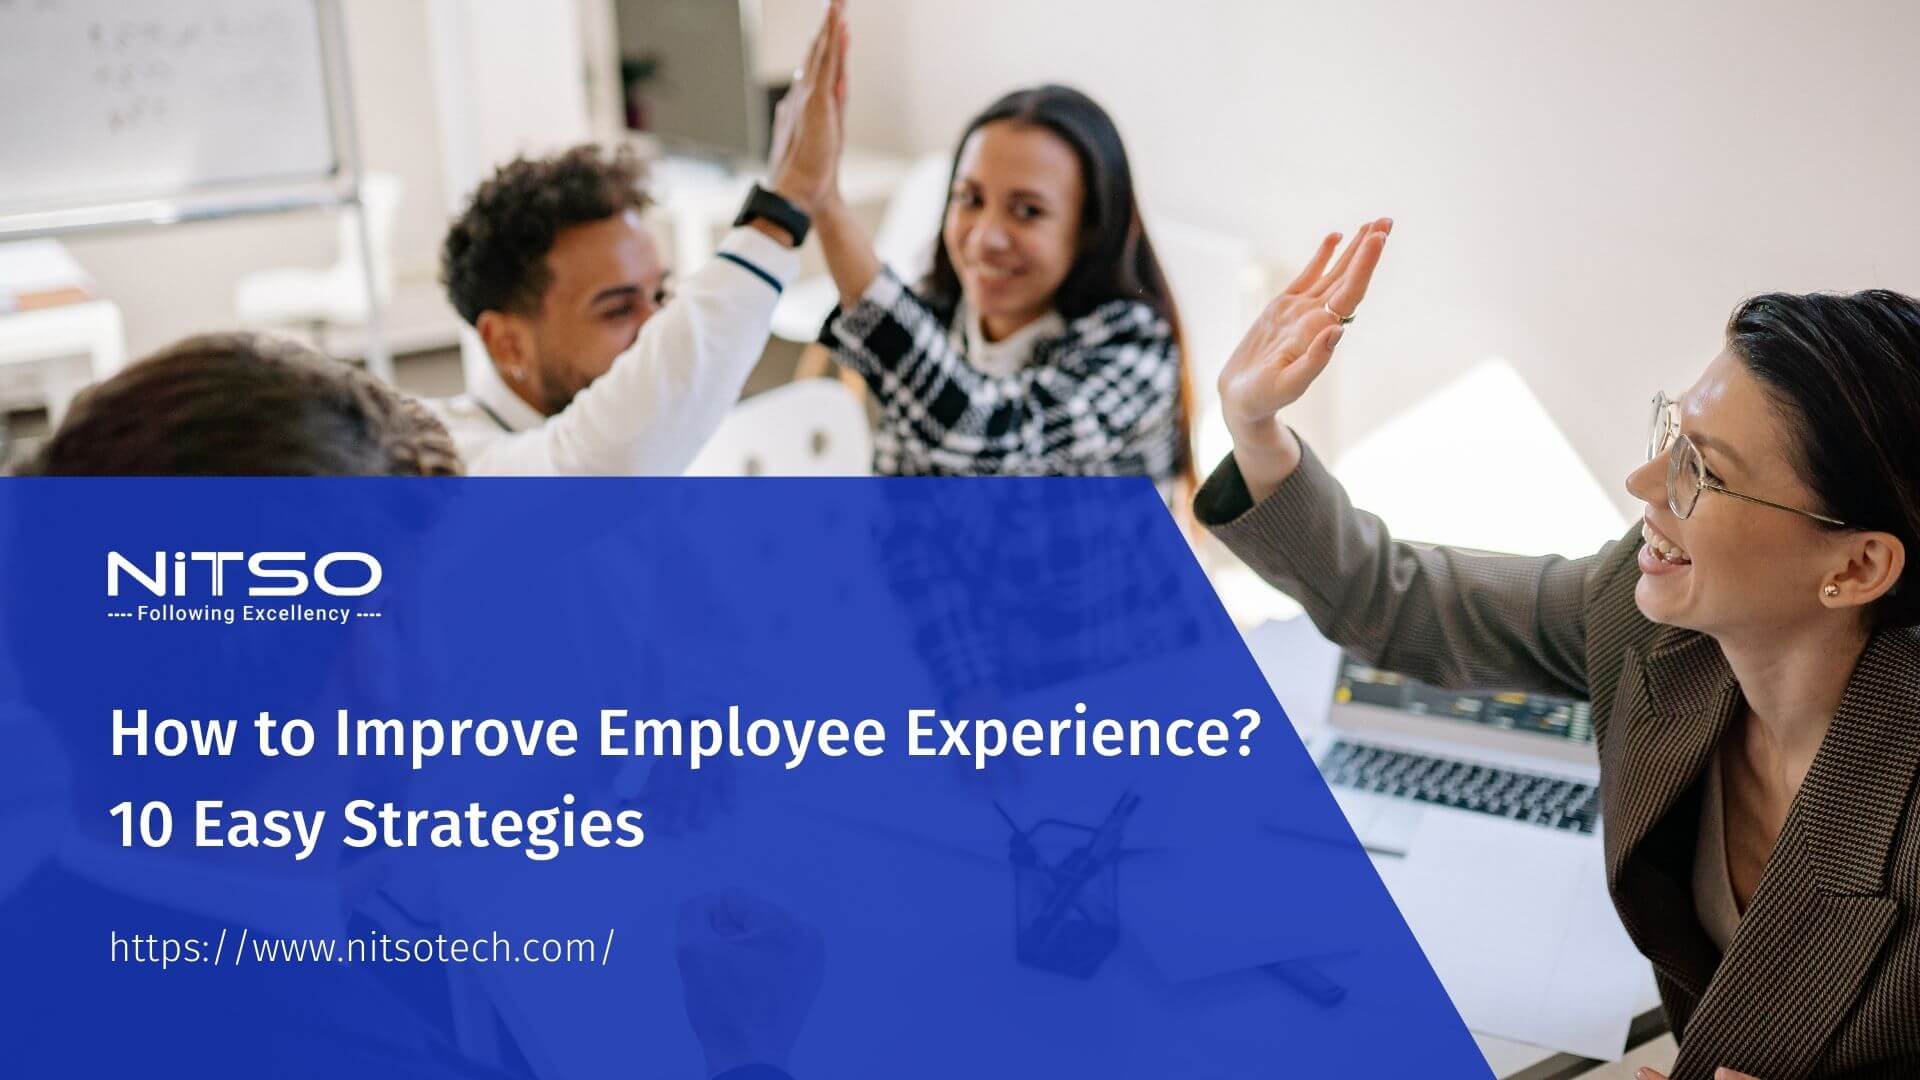 10 Easy Strategies for How to Improve Employee Experience?